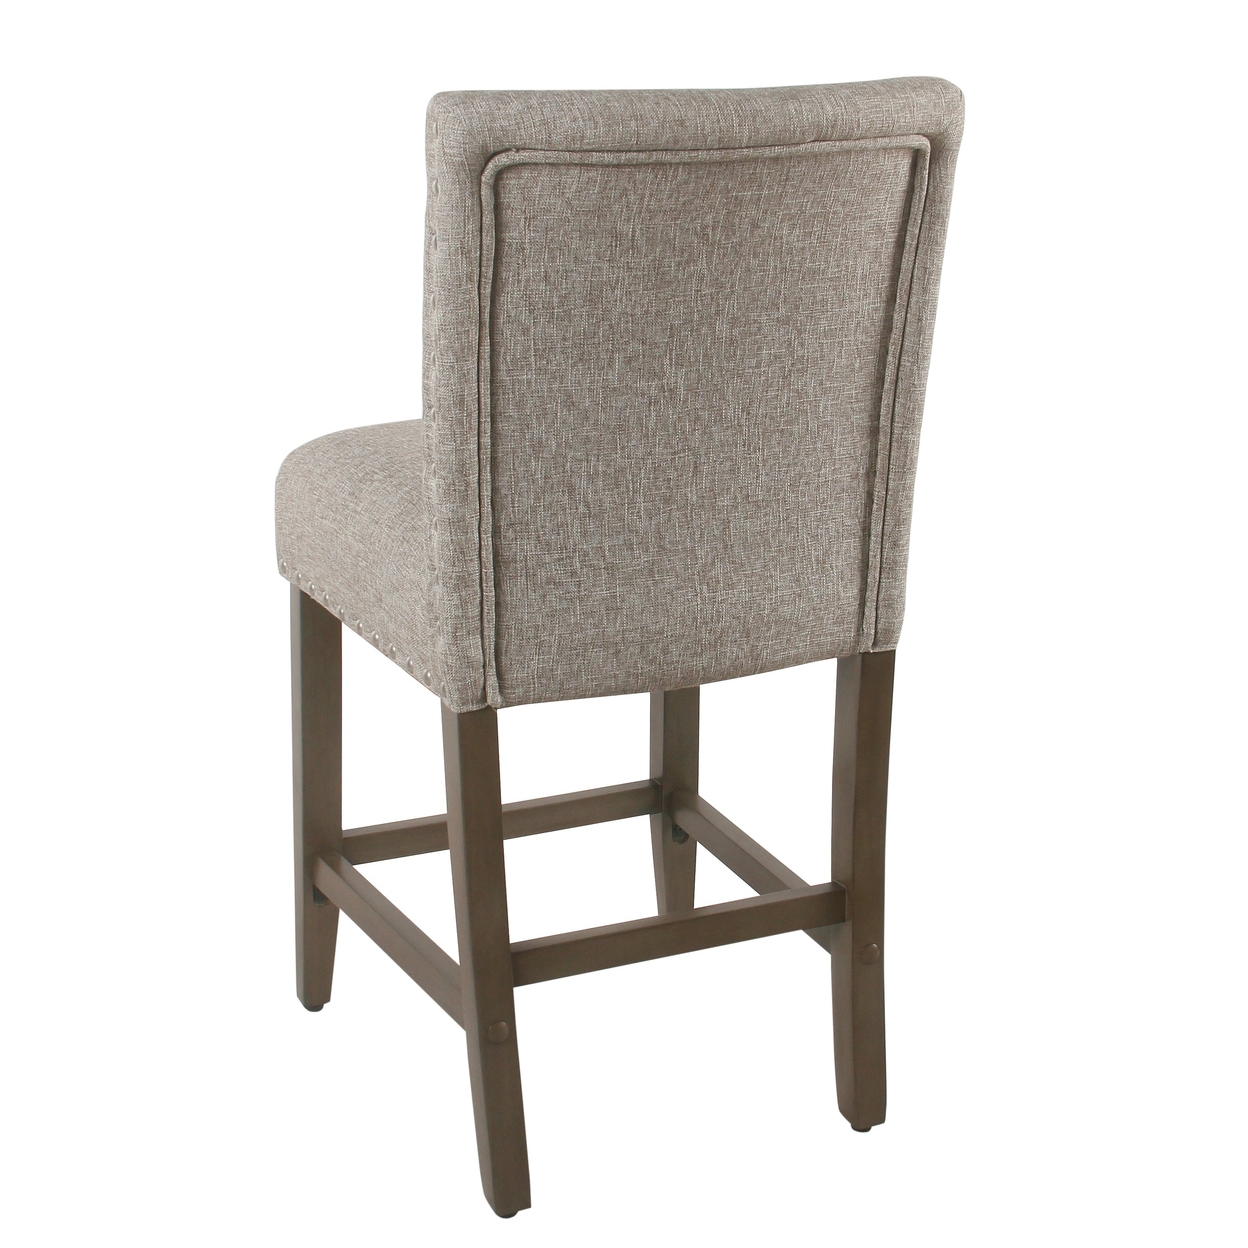 Fabric Upholstered Wooden Counter Stool With Striking Nail Head Trims, Gray And Brown- Saltoro Sherpi